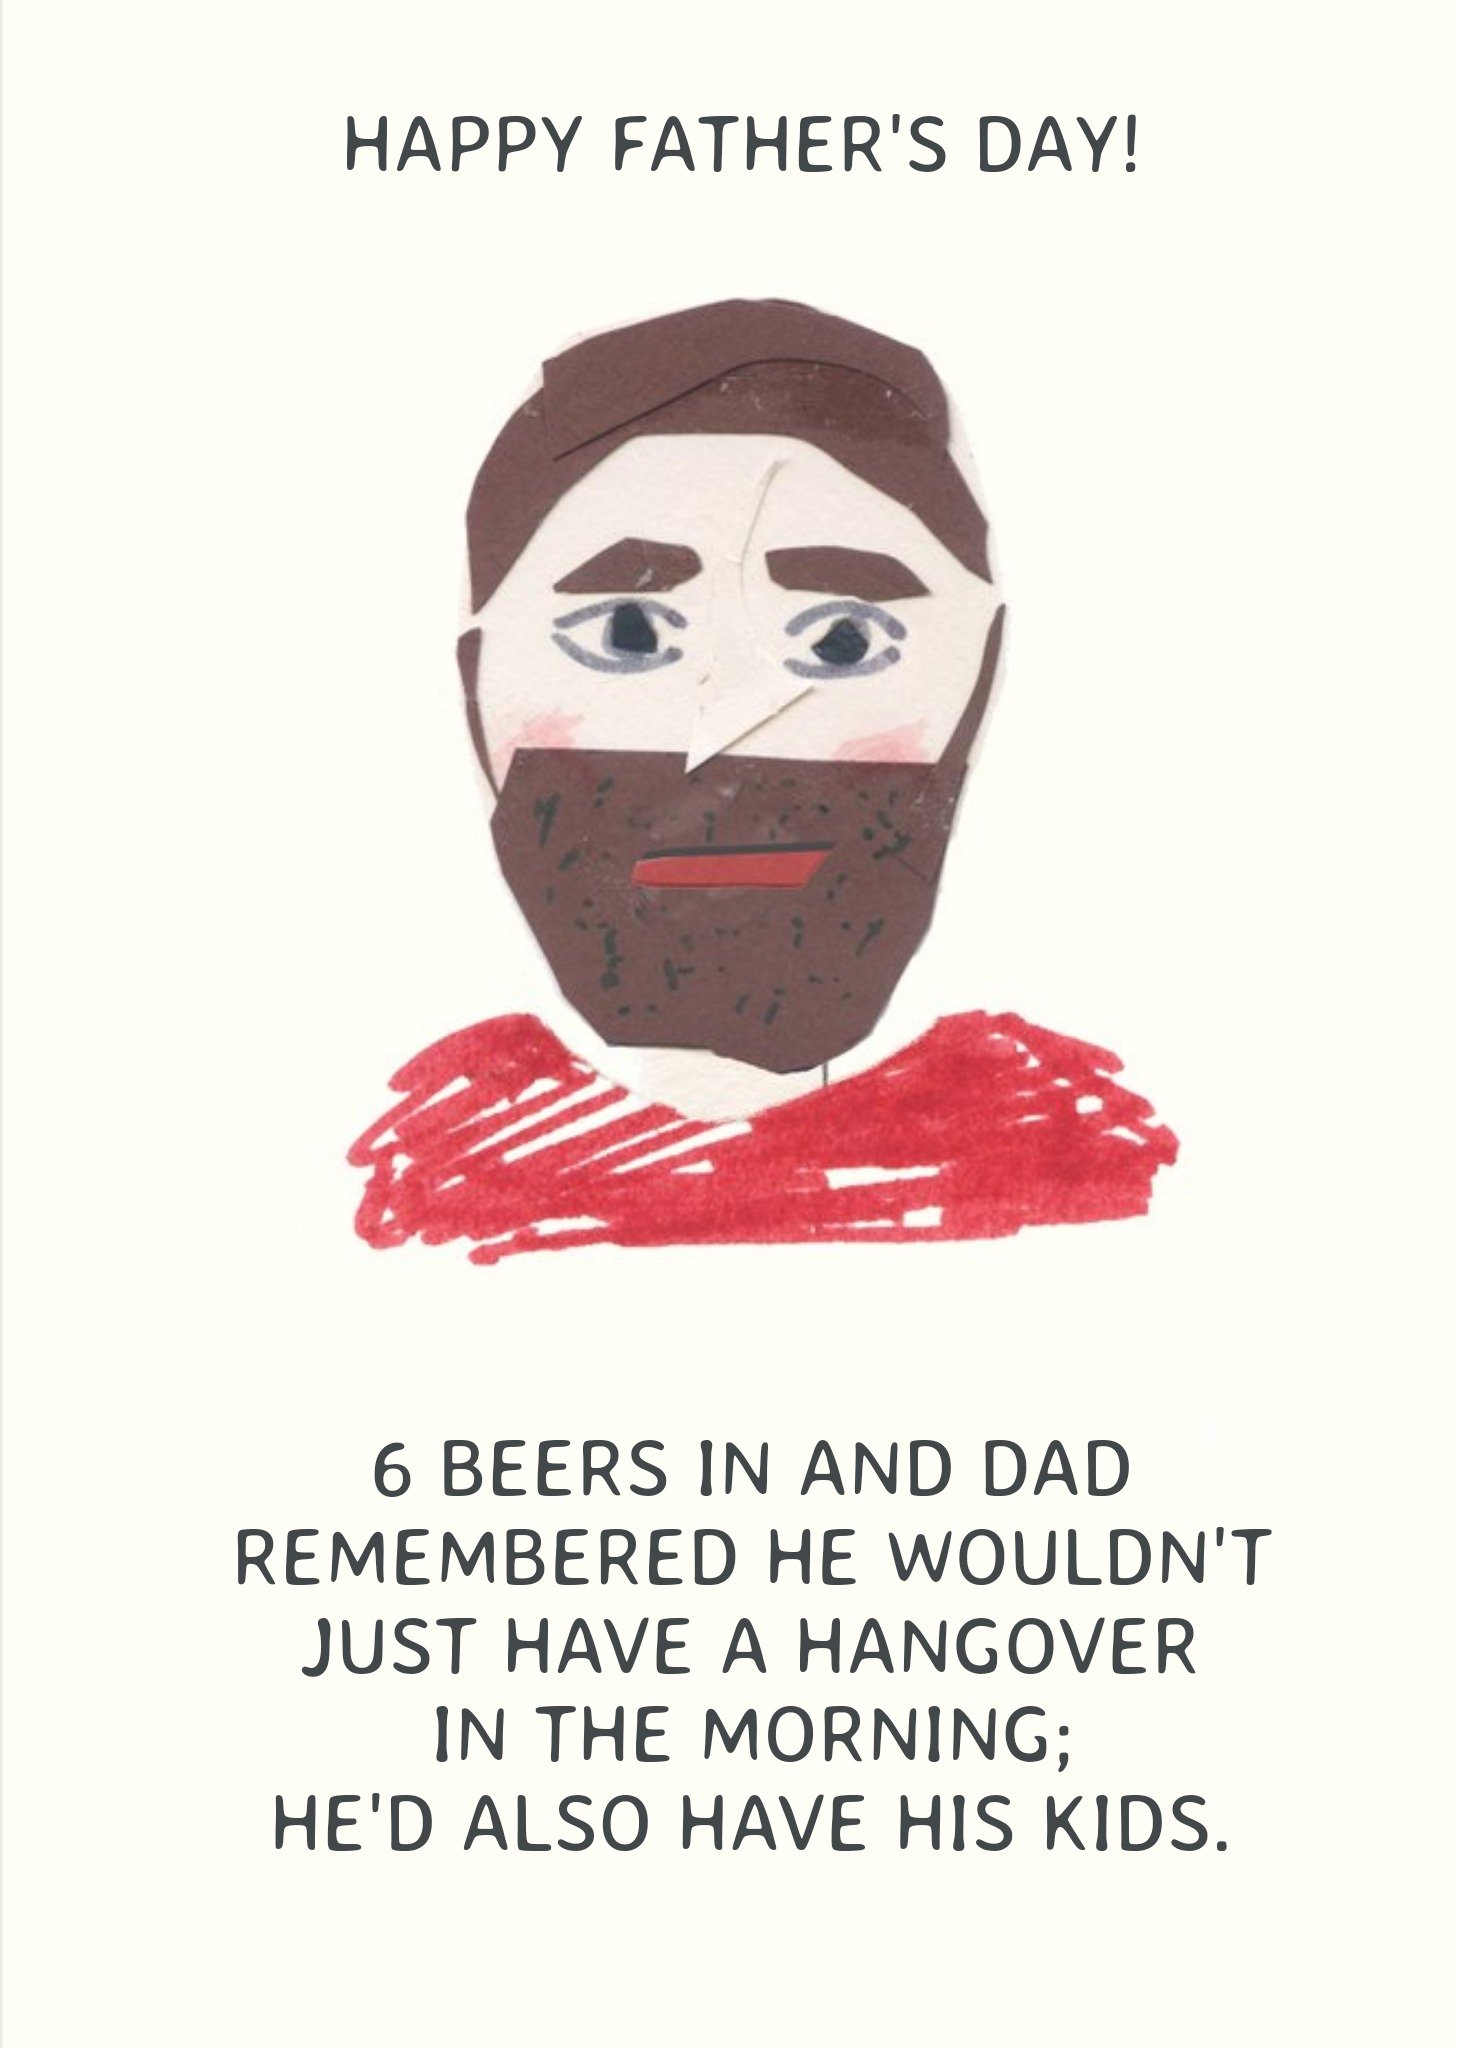 Moonpig Dad Would Have A Hangover And His Kids Funny Father's Day Card Ecard